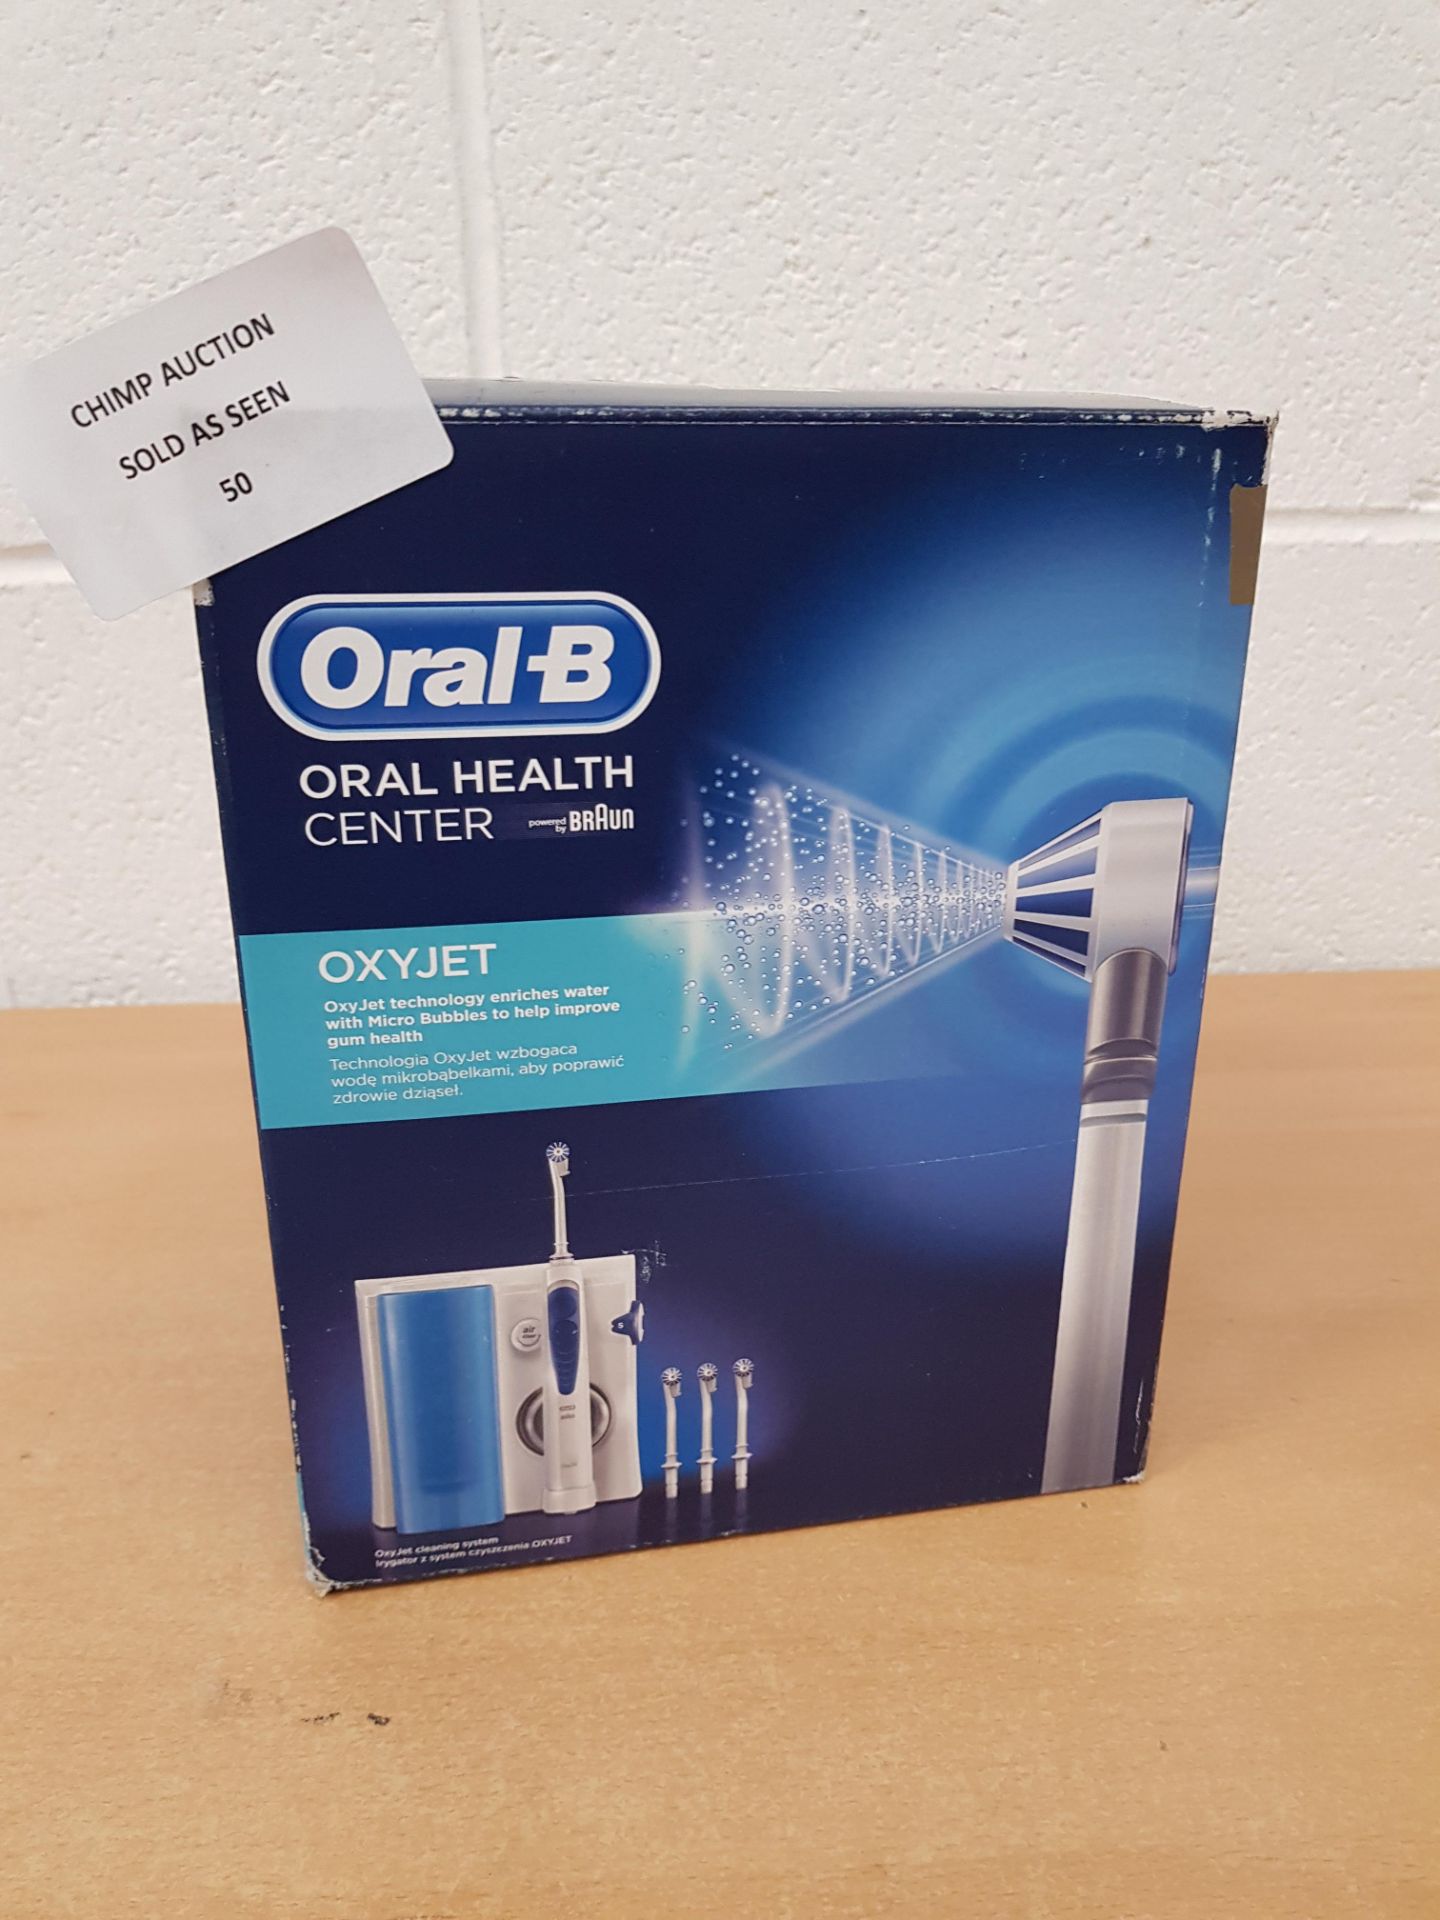 Oral-B Oral Health Oxyjet Cleaning System RRP £79.99